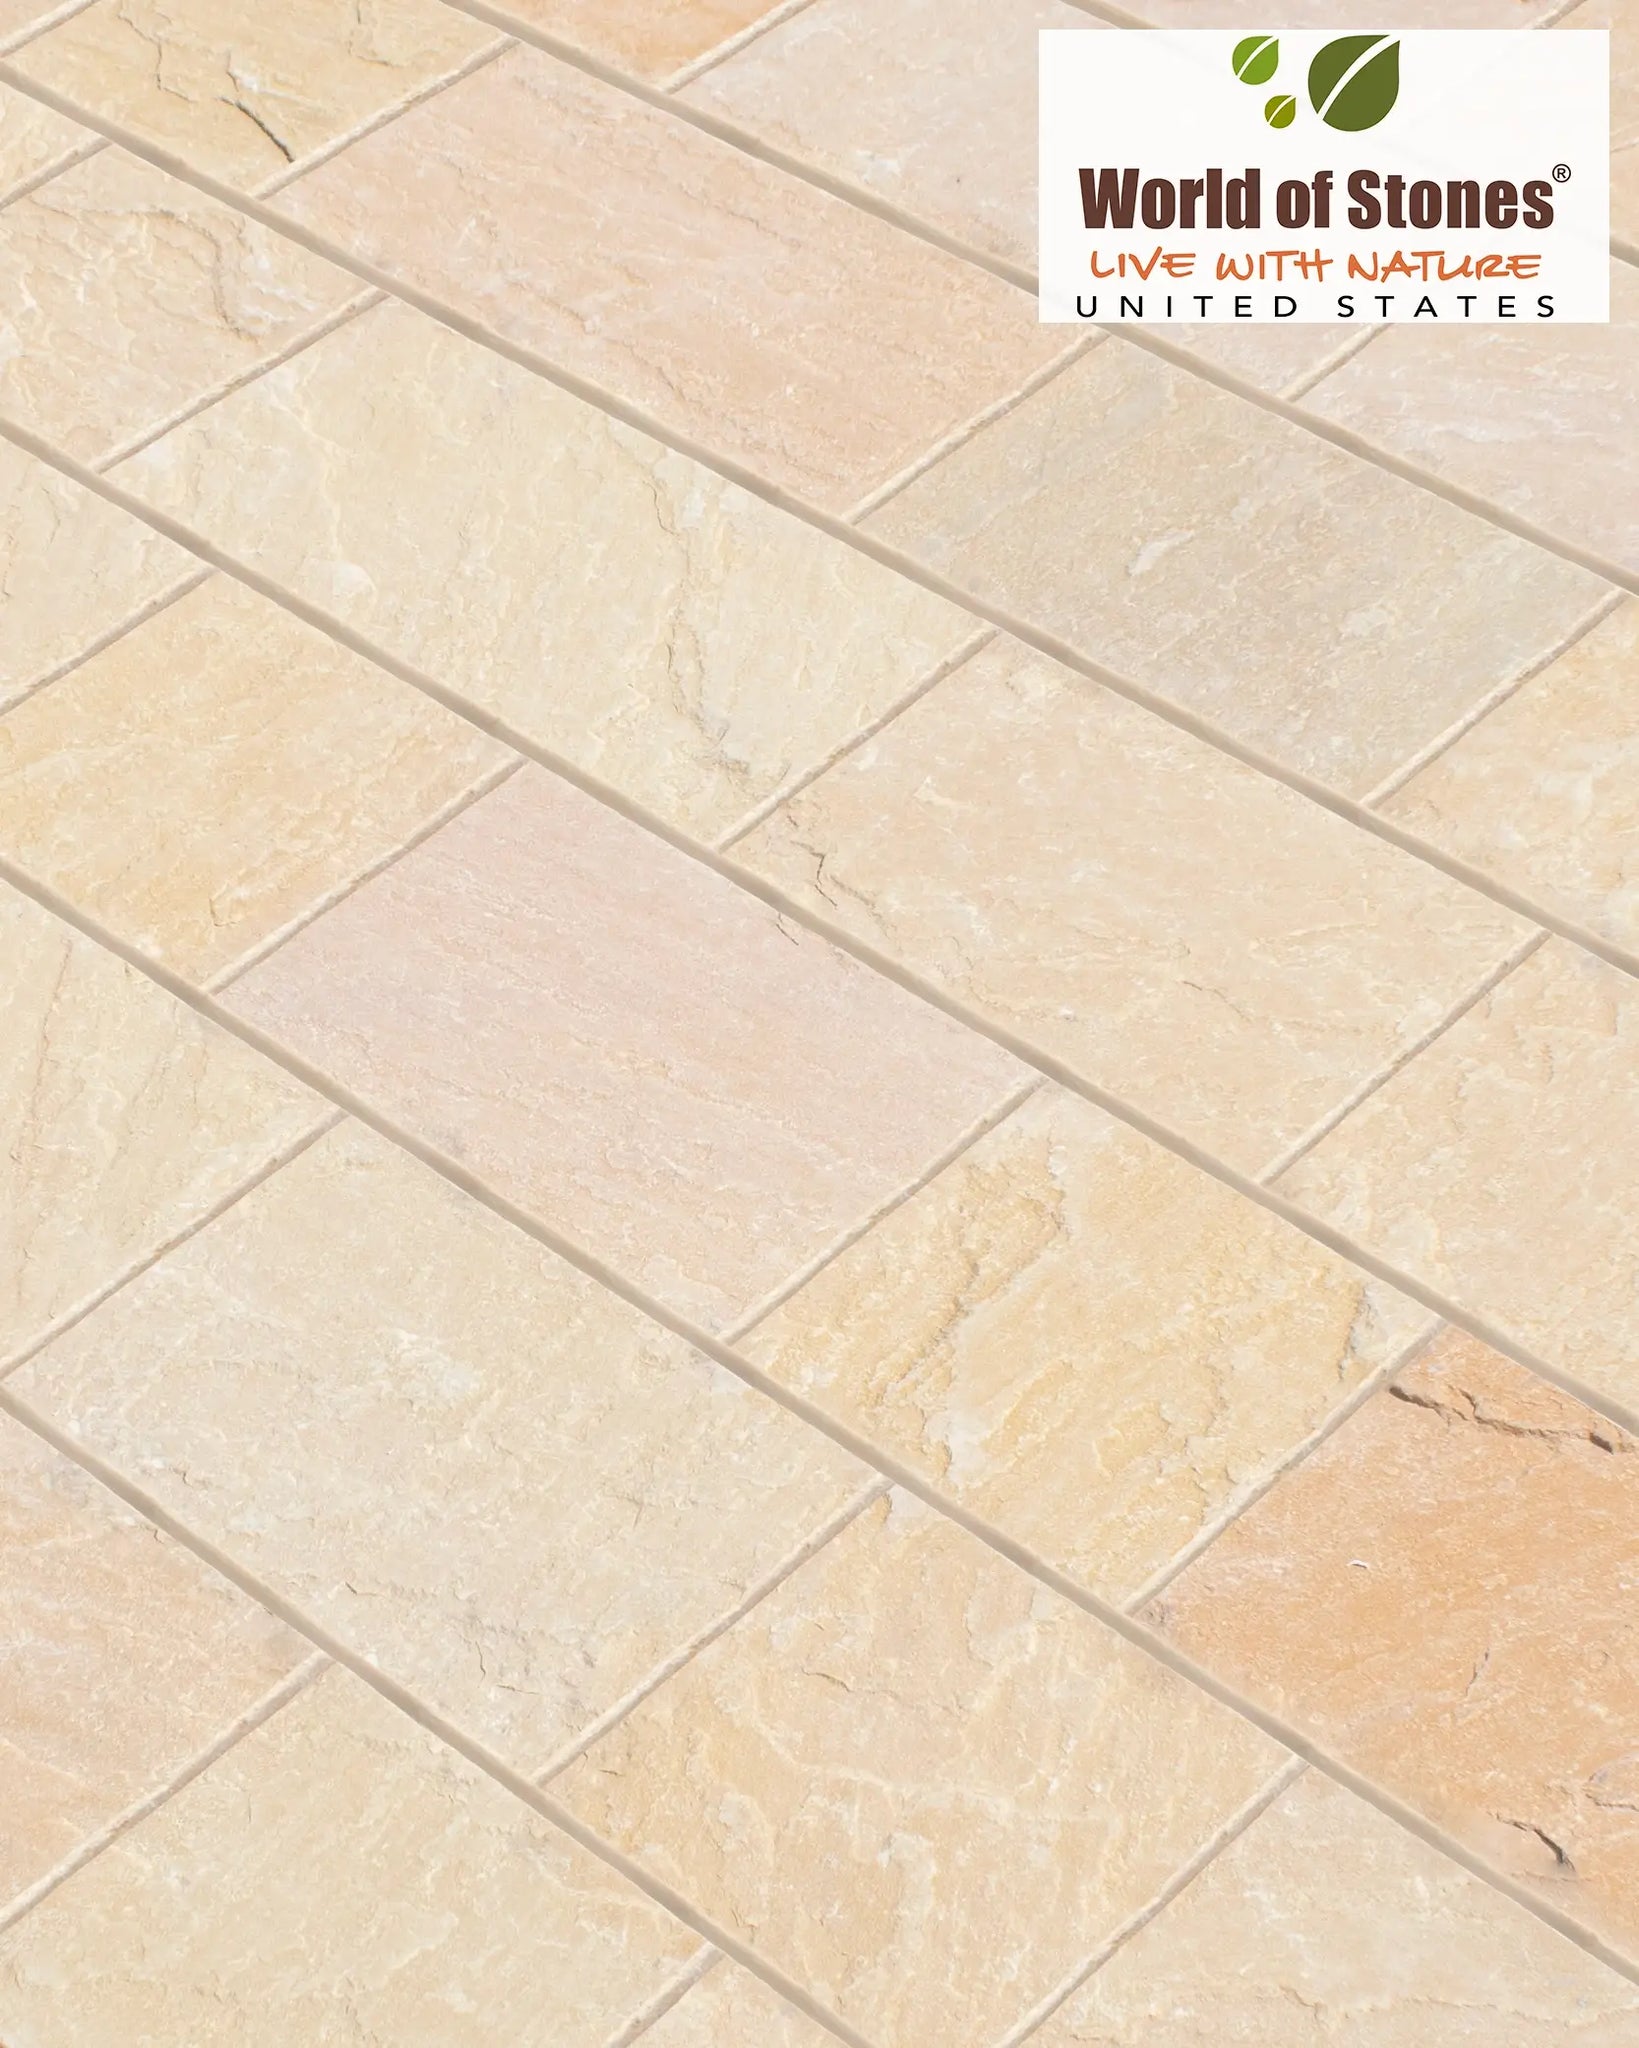 How to Choose Paver Colors – 7 Important Tips to Consider